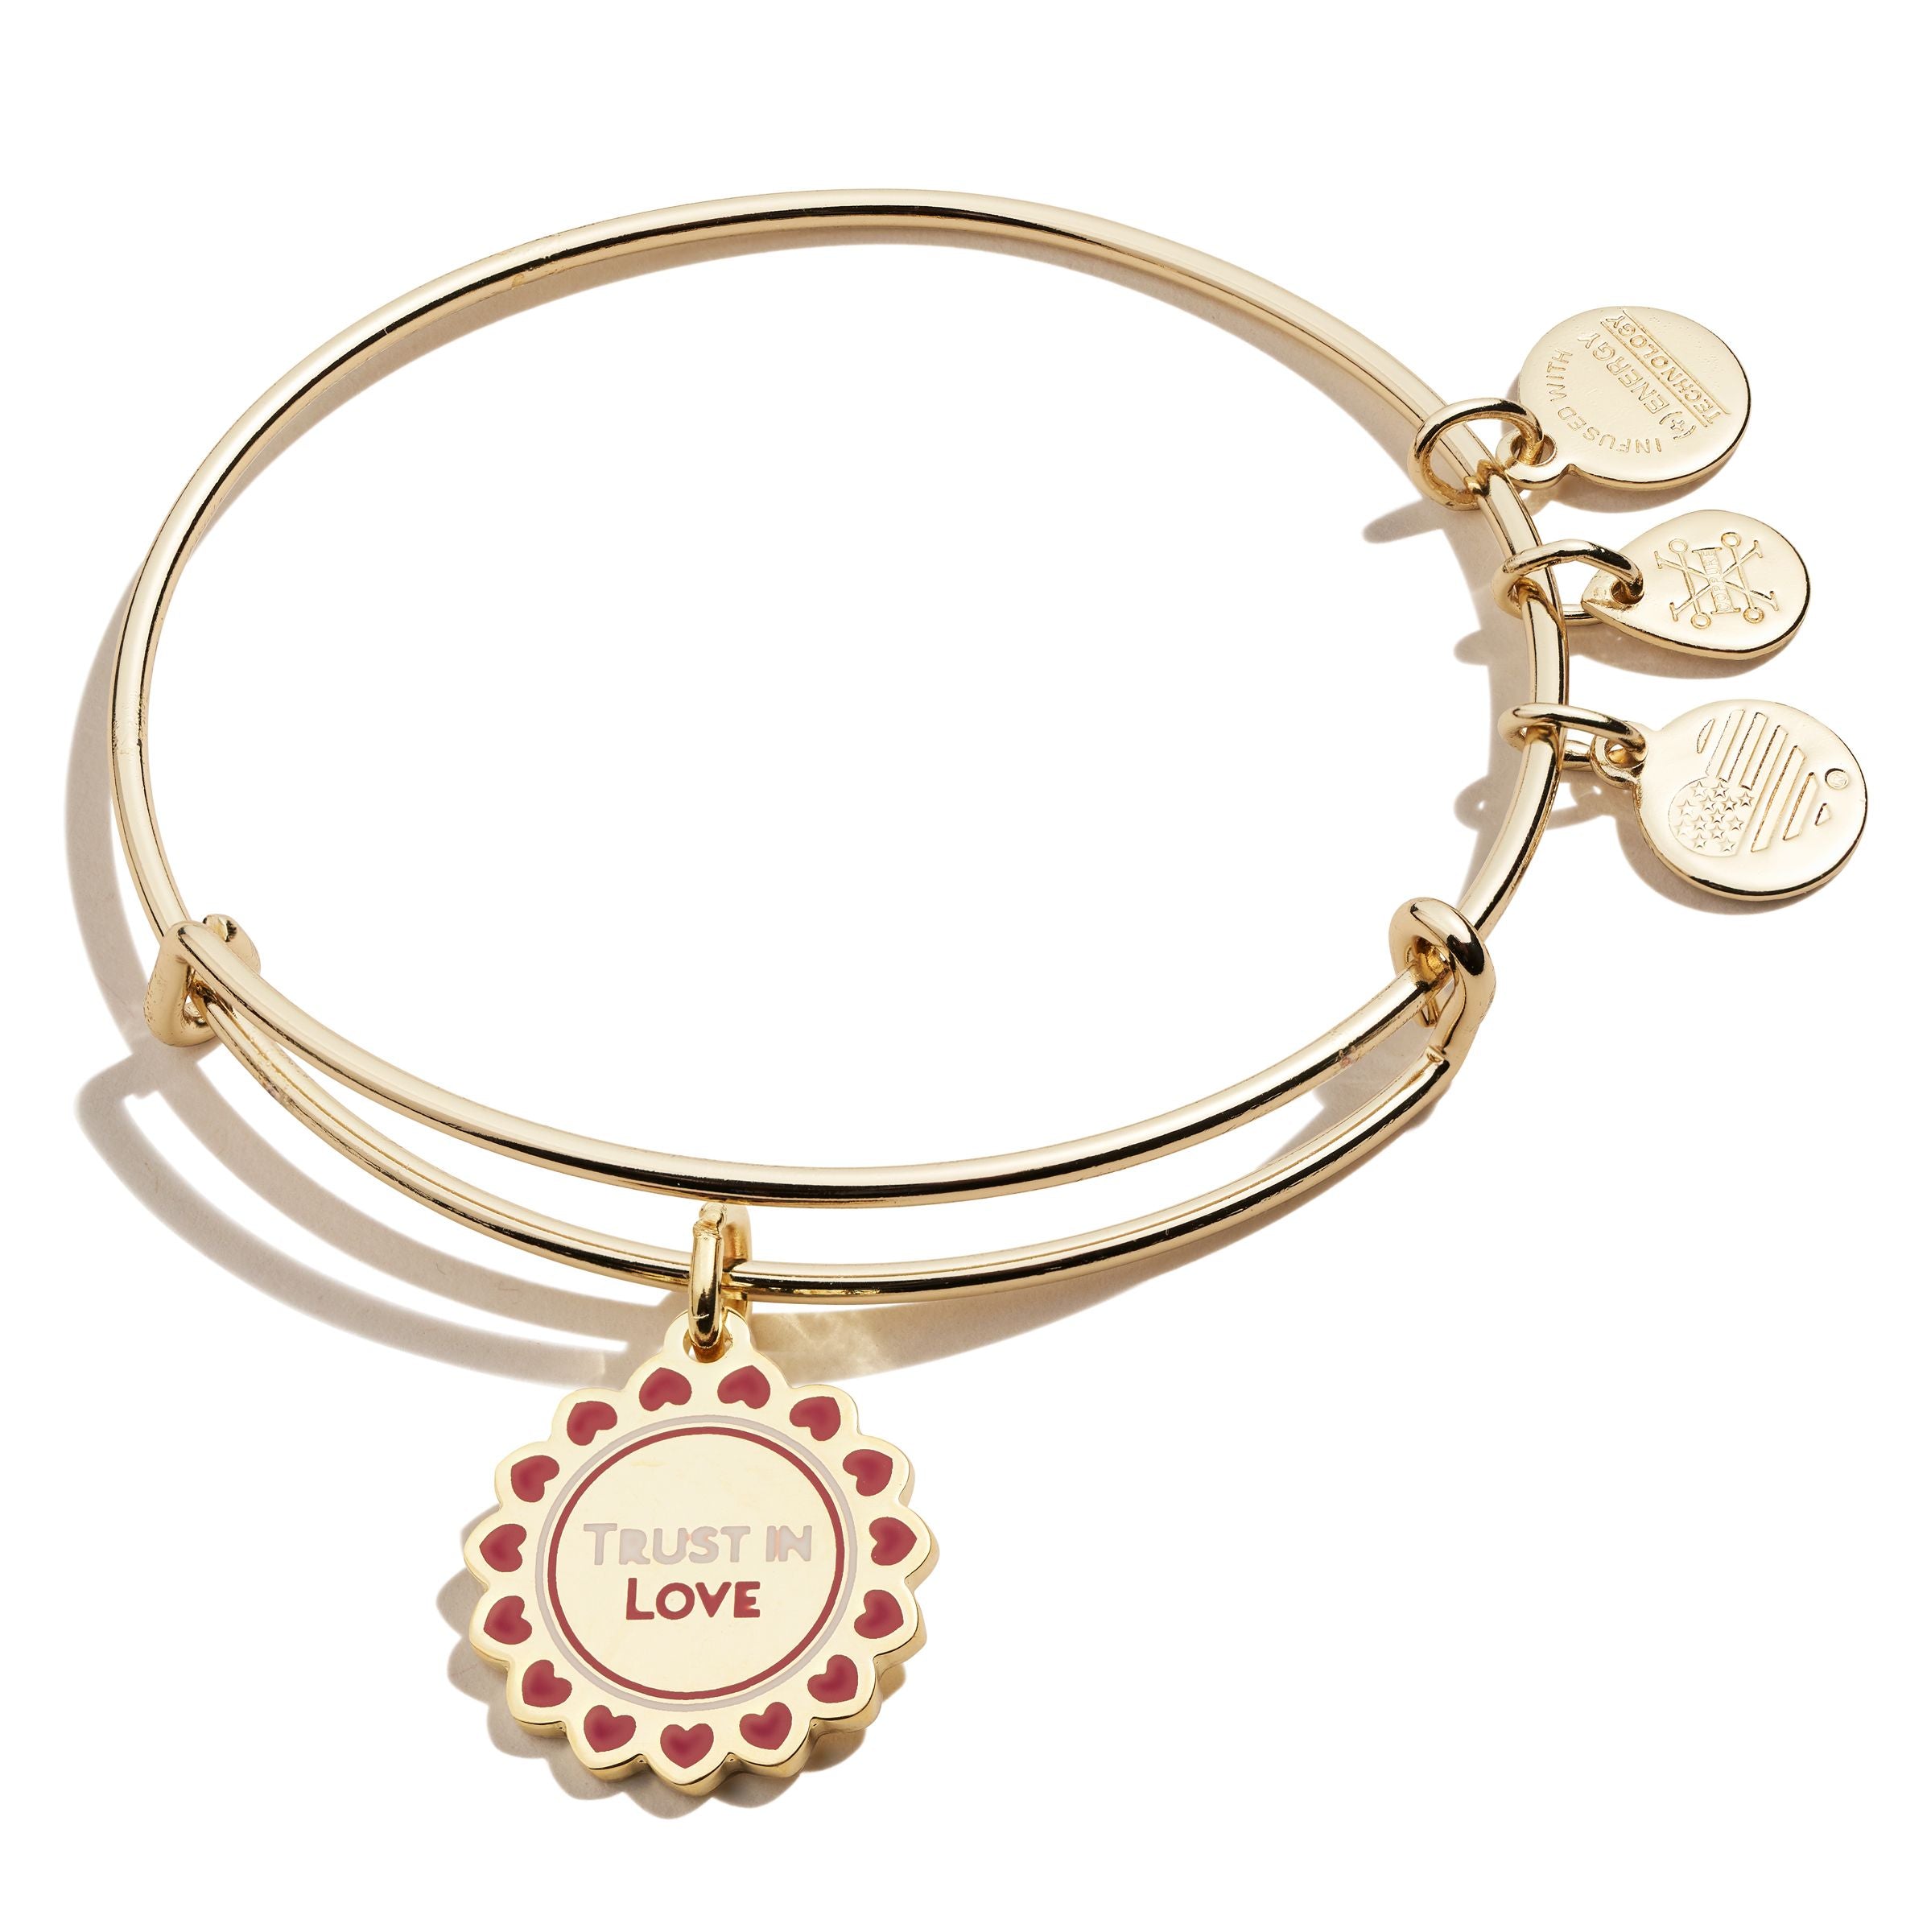 Alex and Ani Color Infusion Fall In Love Bangle Bracelet Charm Bracelet Fall